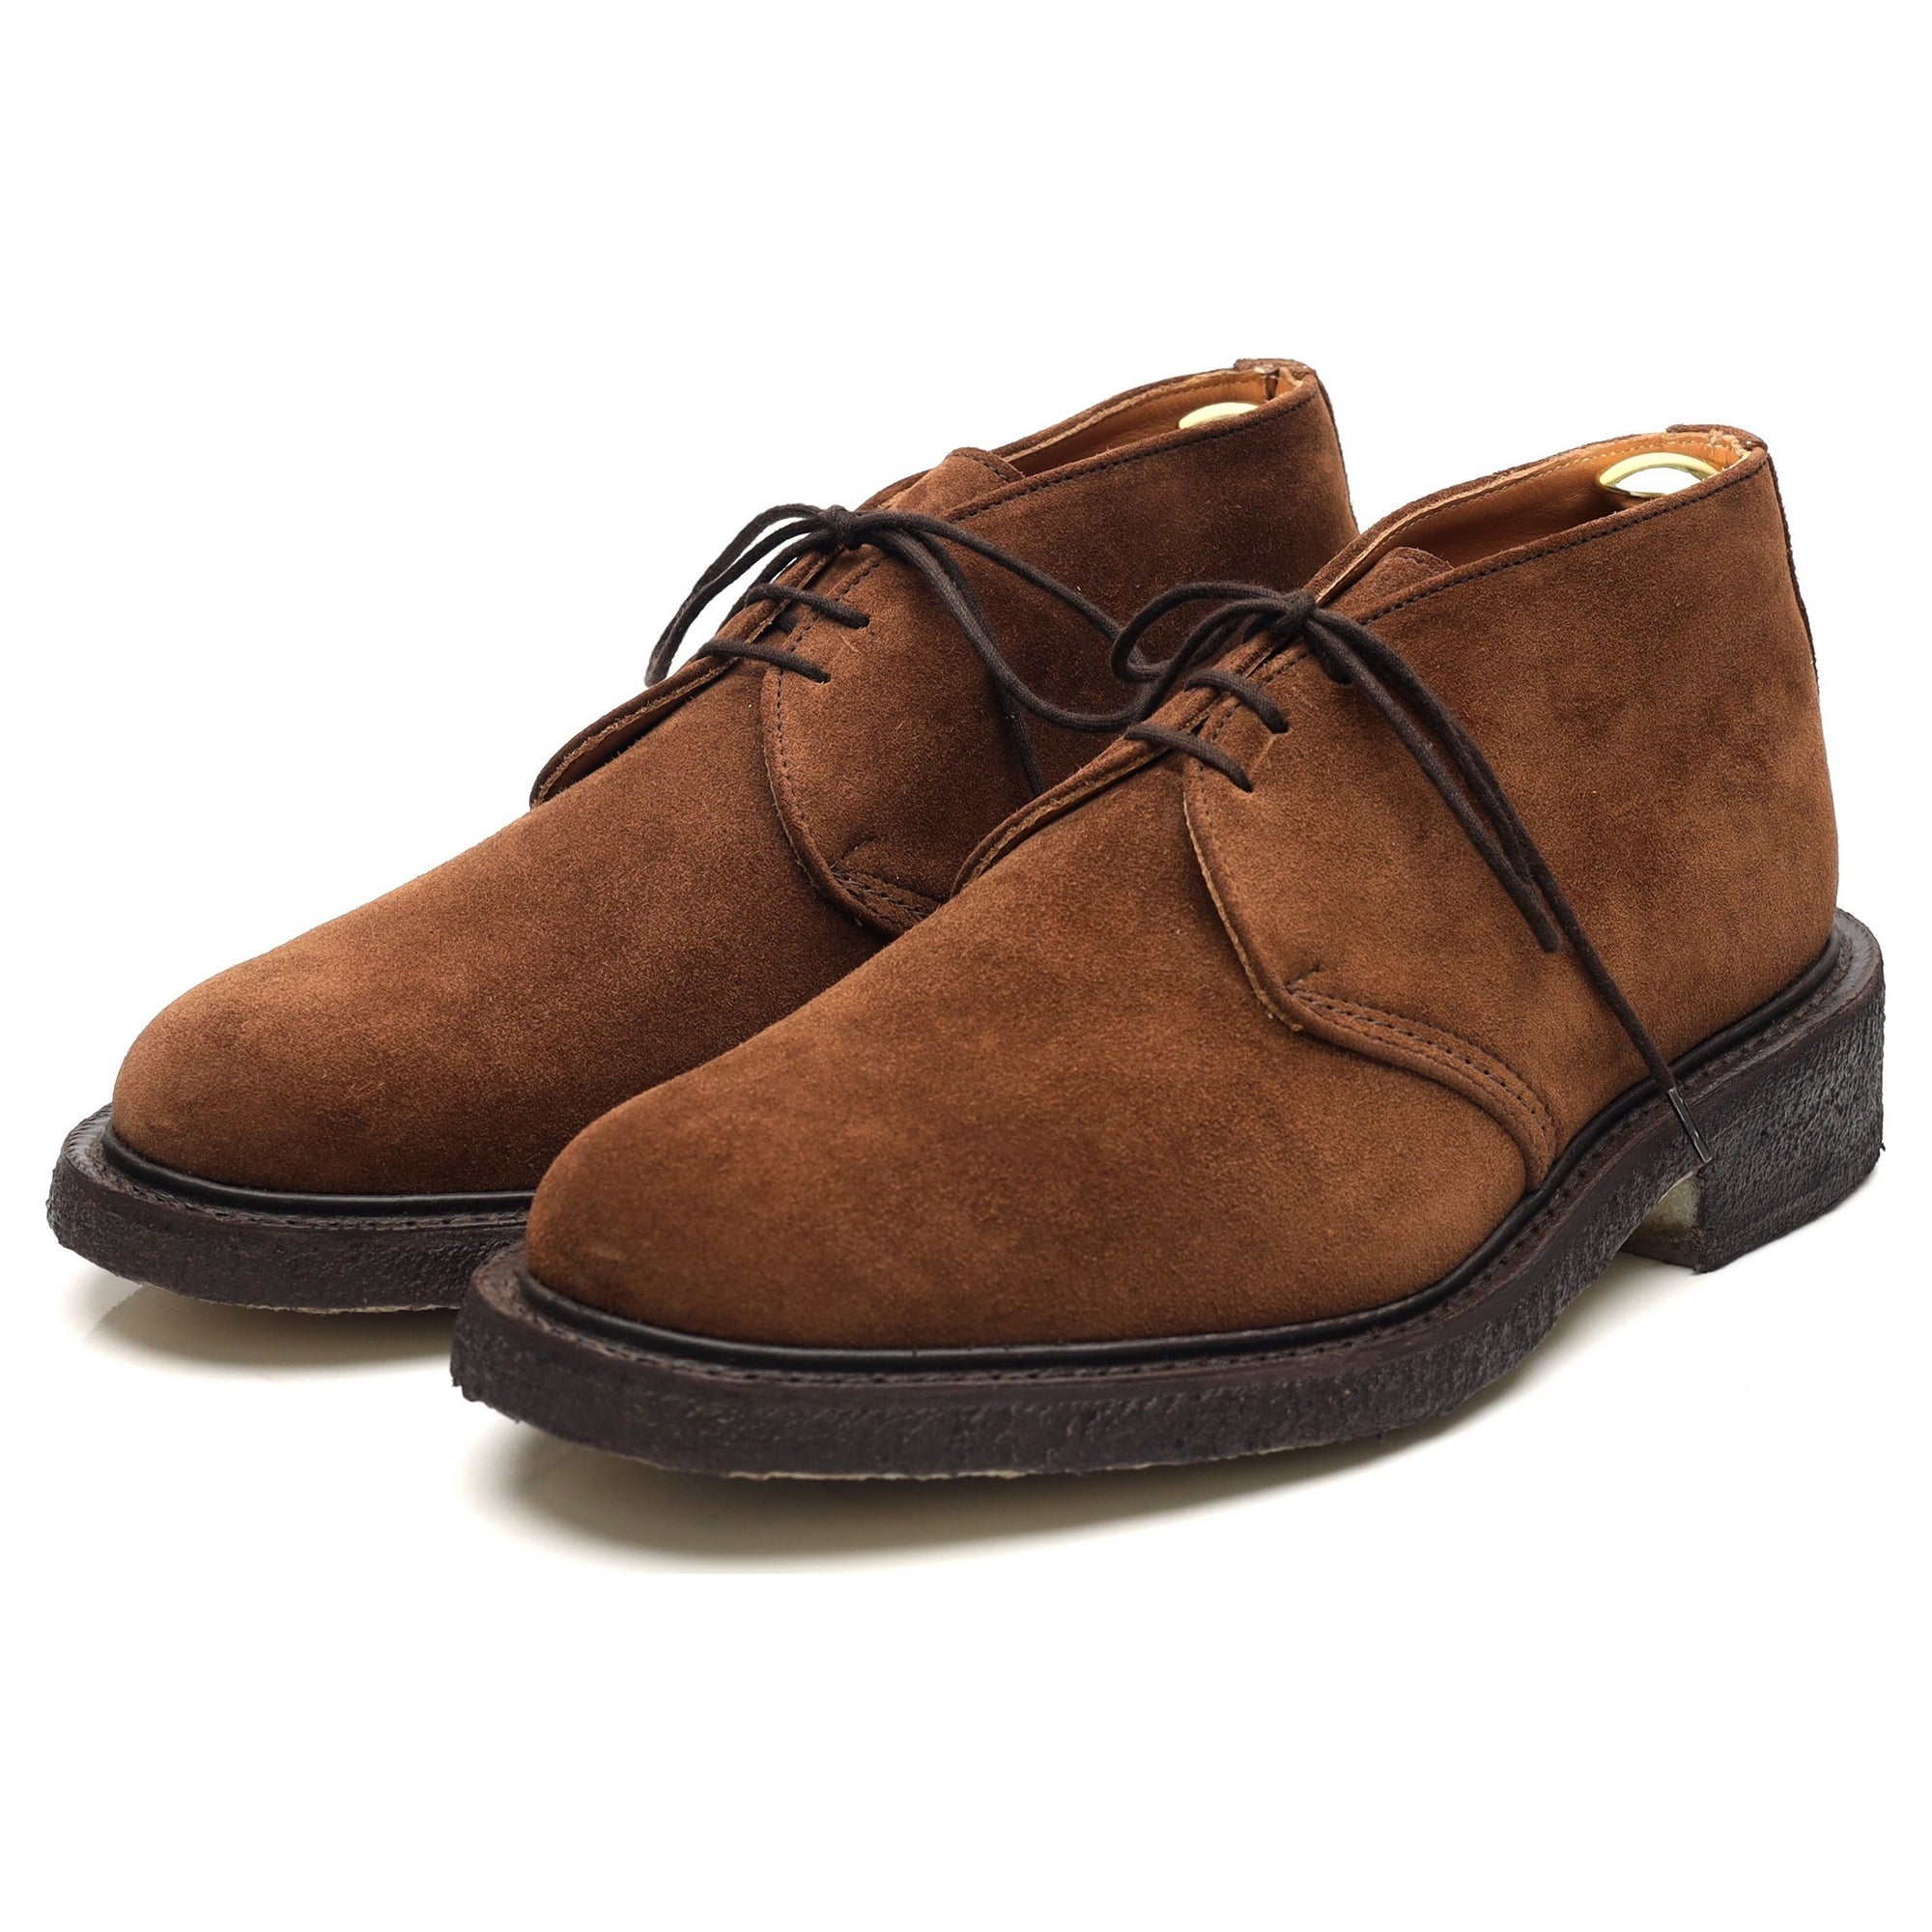 Tricker's - Abbot's Shoes